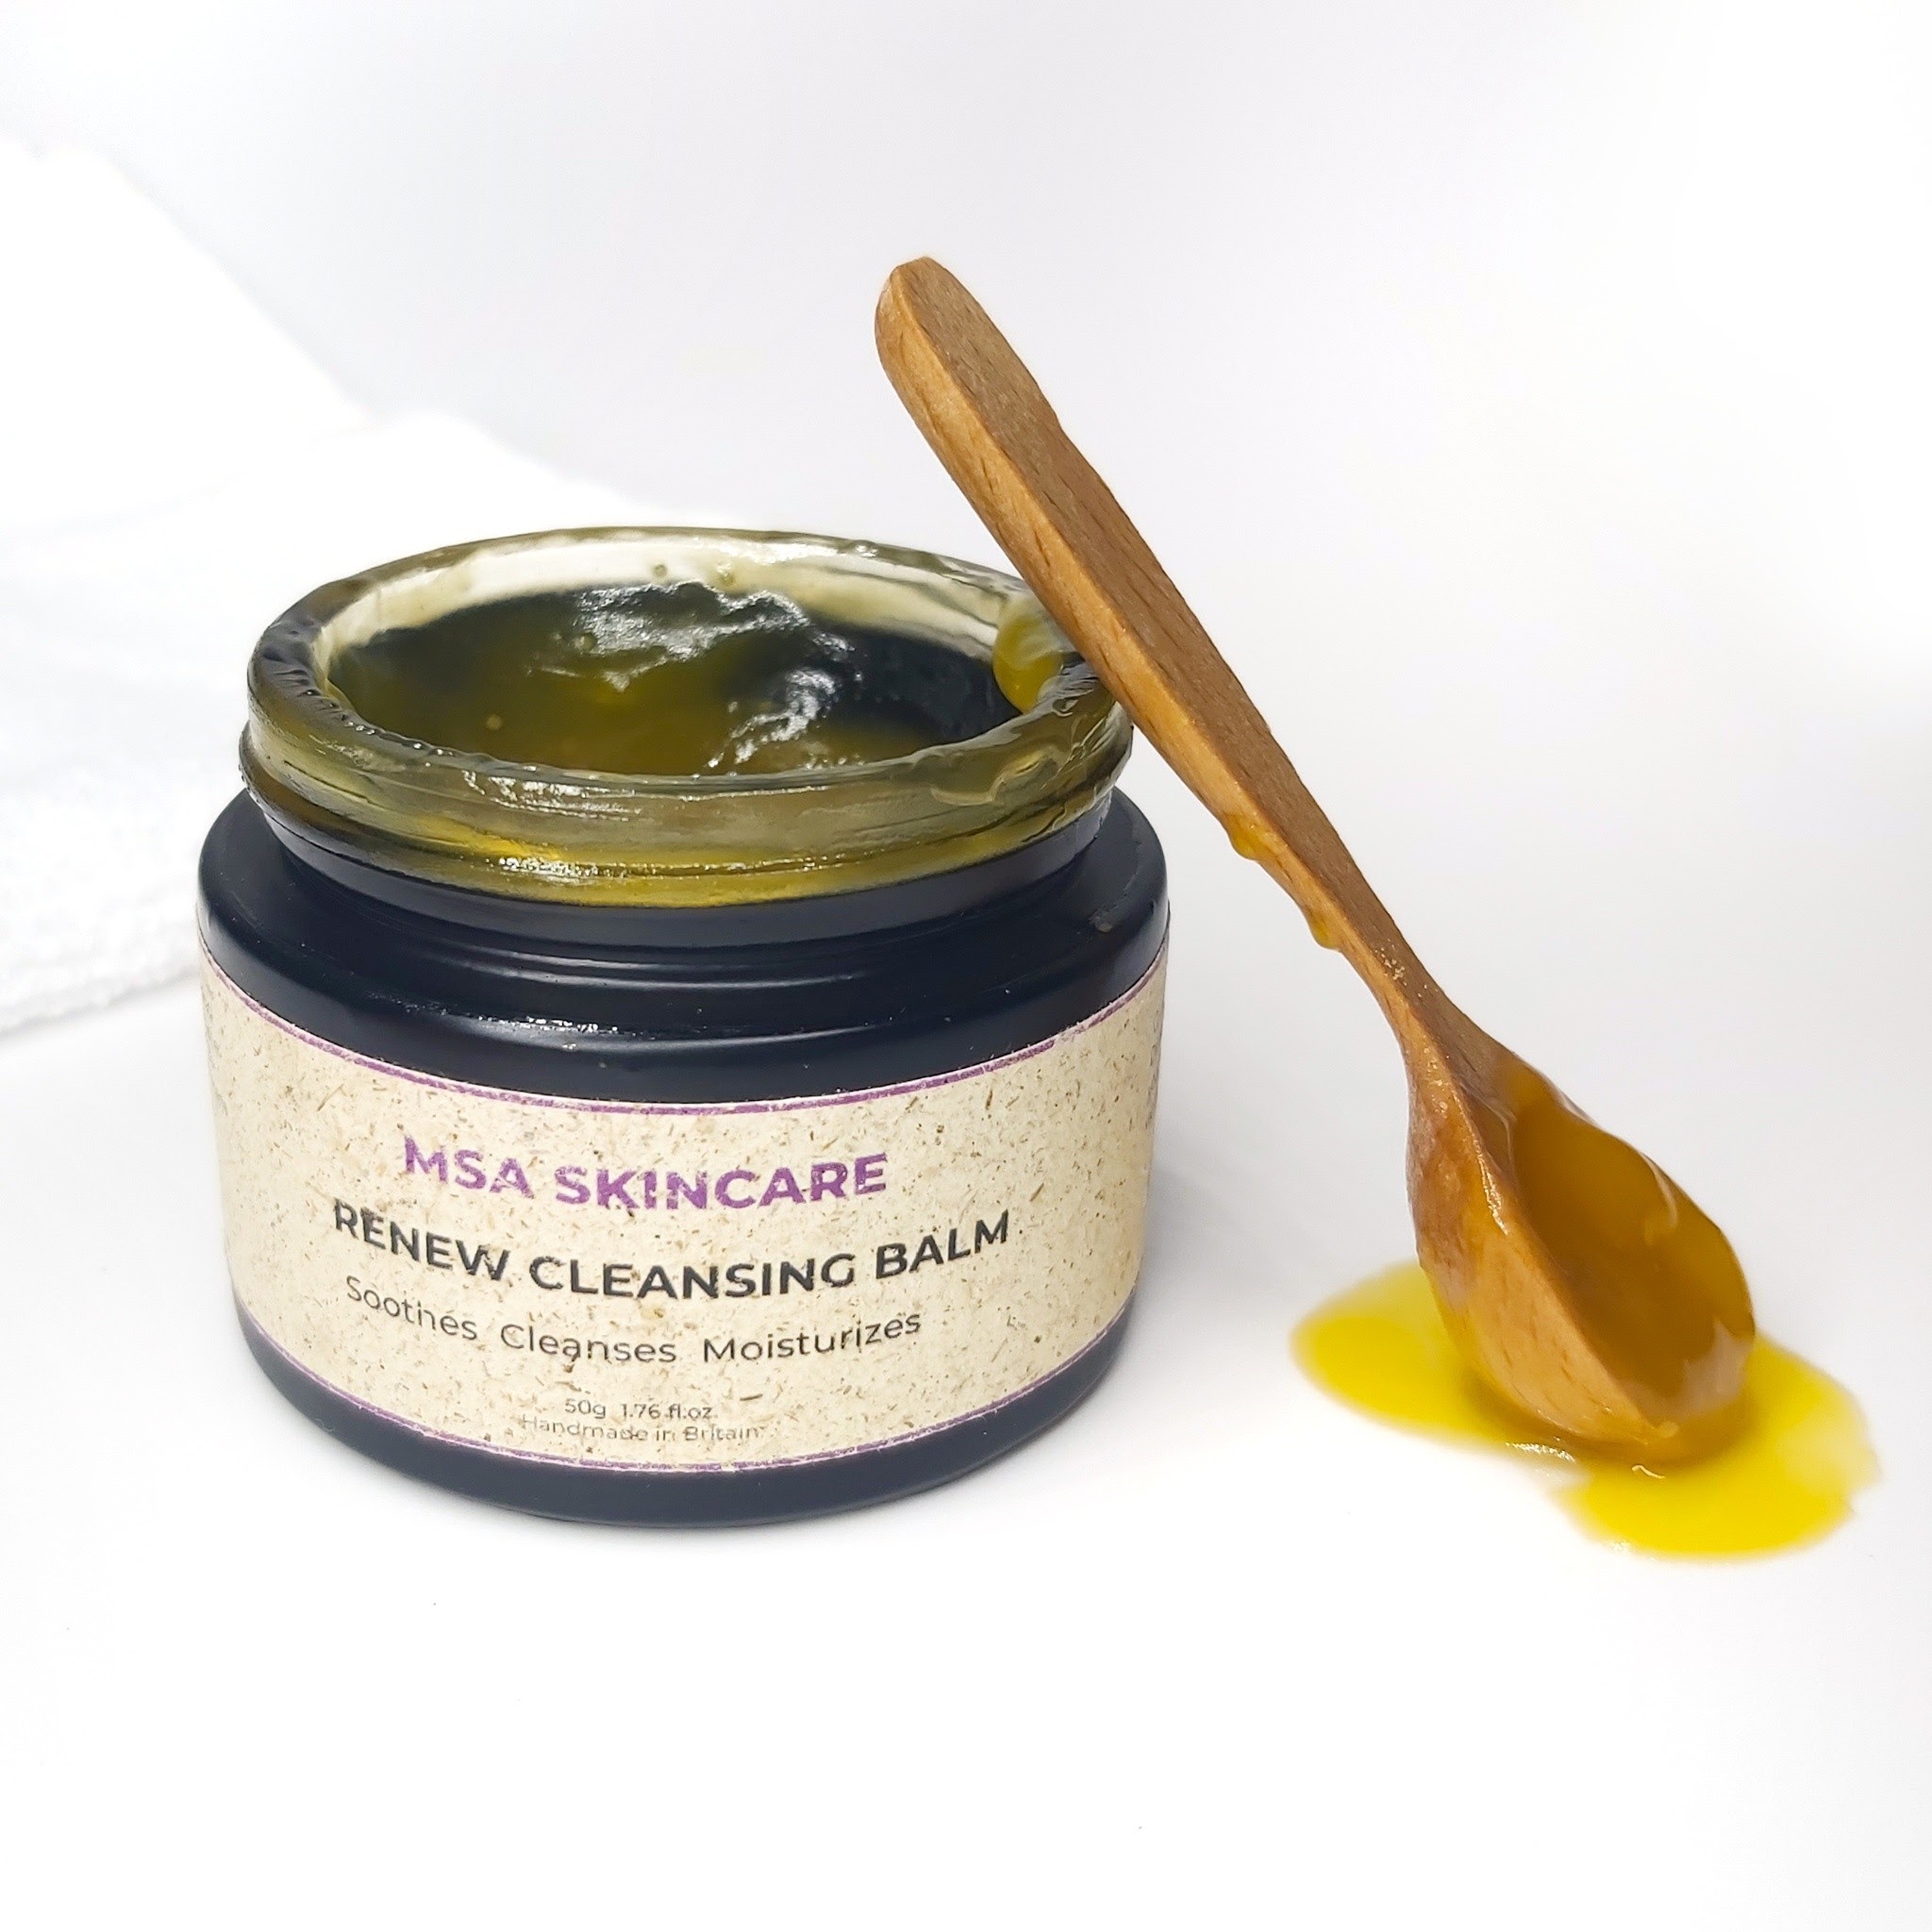 An open jar of MSA Skincare's Renew Cleansing Balm with a spoon of balm propped up against the jar. Natural SKincare review by Beauty Folio.